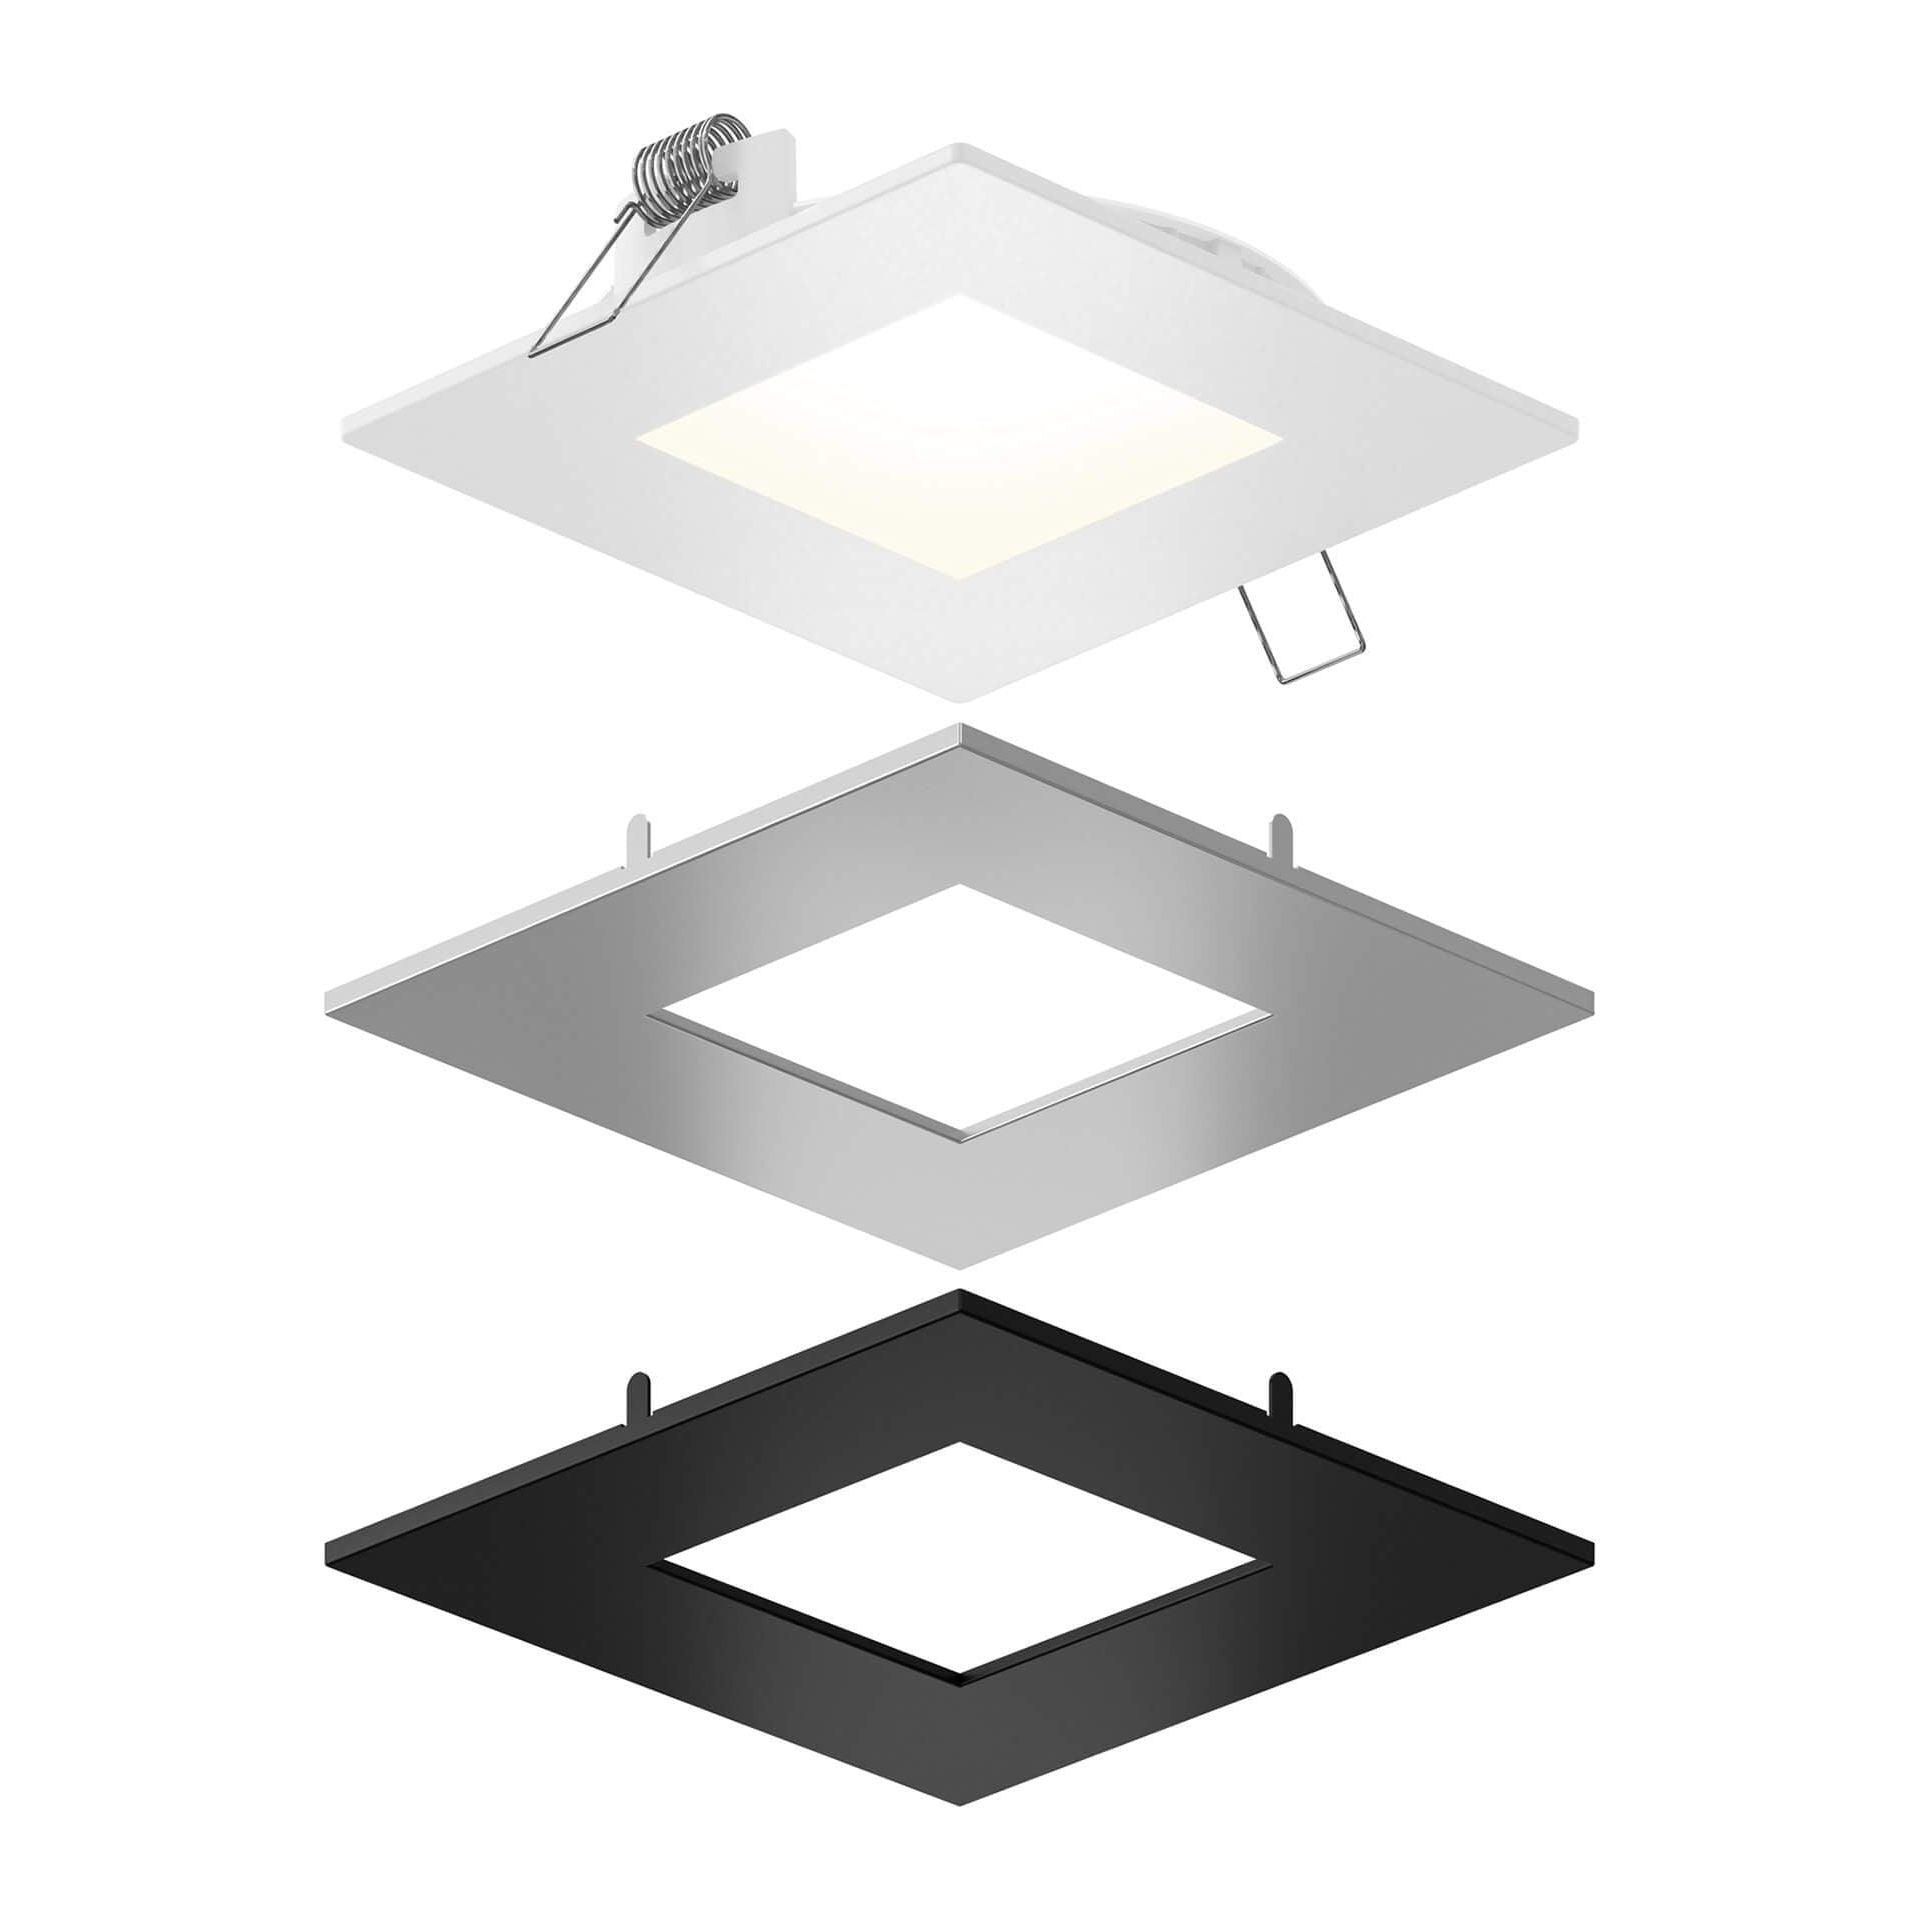 DALS - Square Led Recessed Panel Light With Multi Trim - Lights Canada